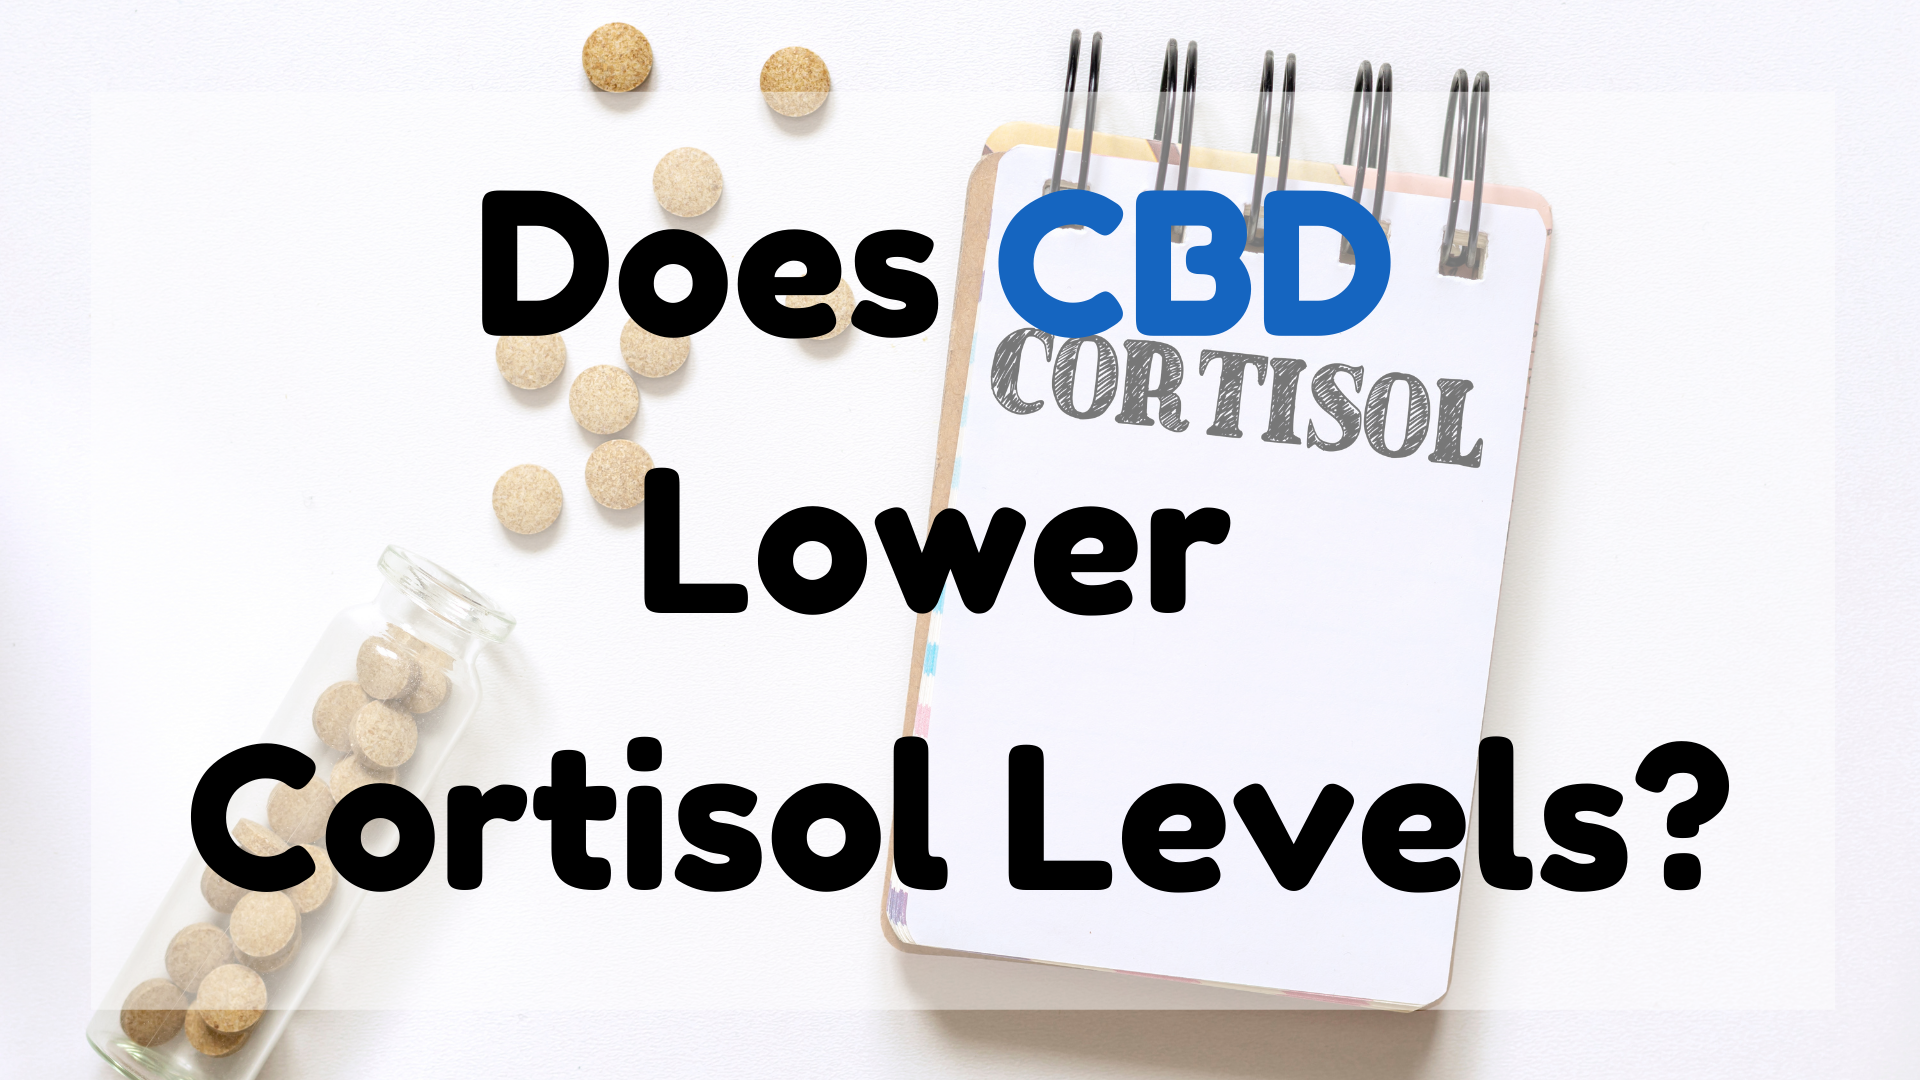 Does CBD Lower Cortisol Levels